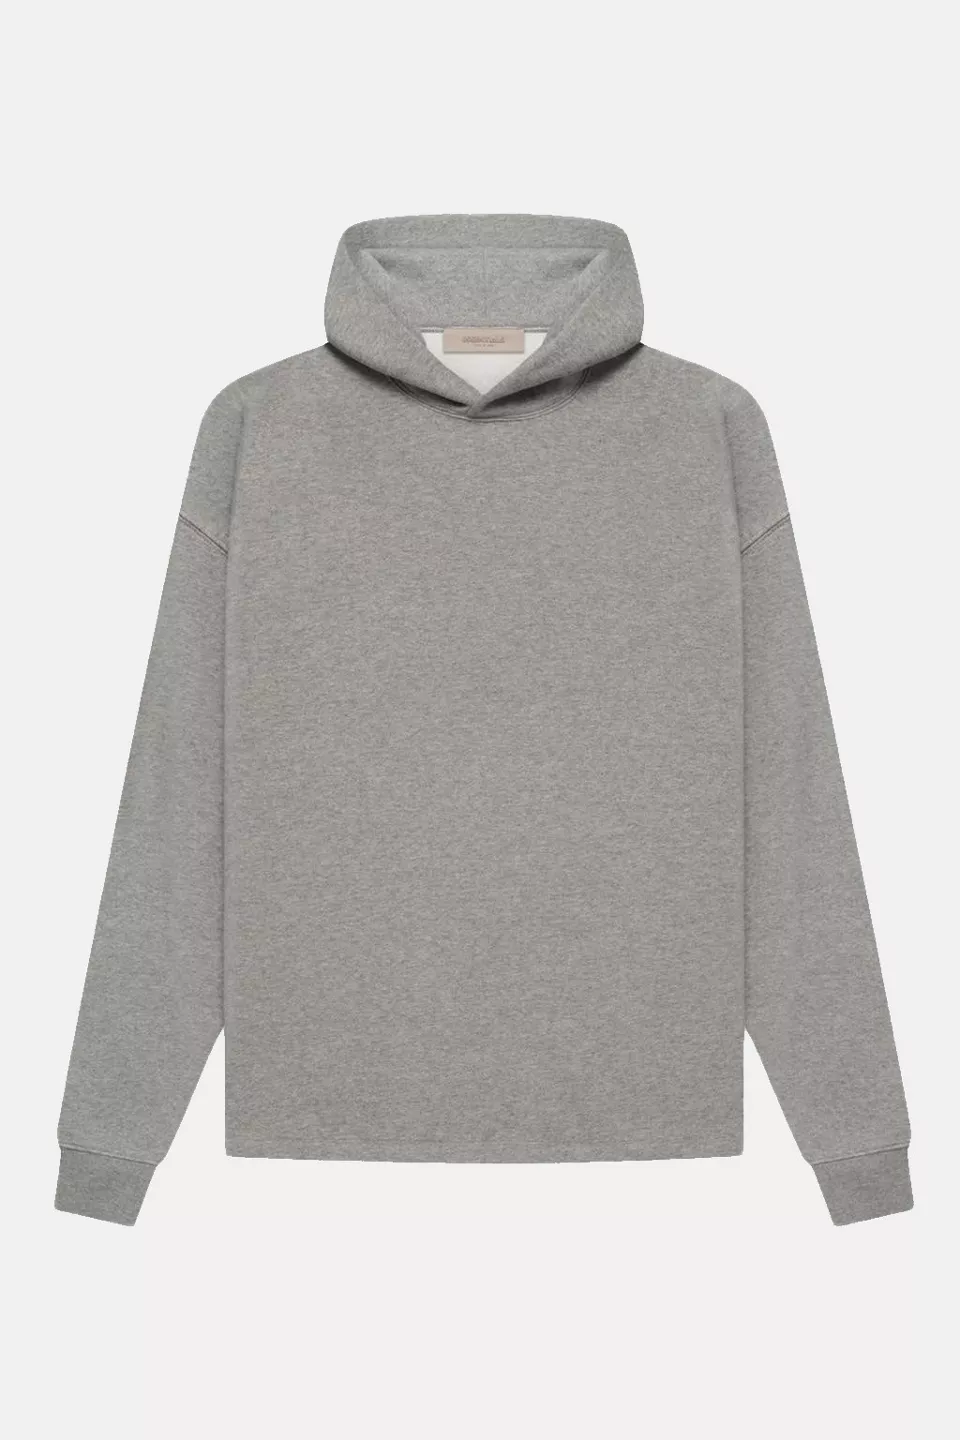 Fear of God Essential Men's Gray Relaxed Hoodie, Size-XL - 1